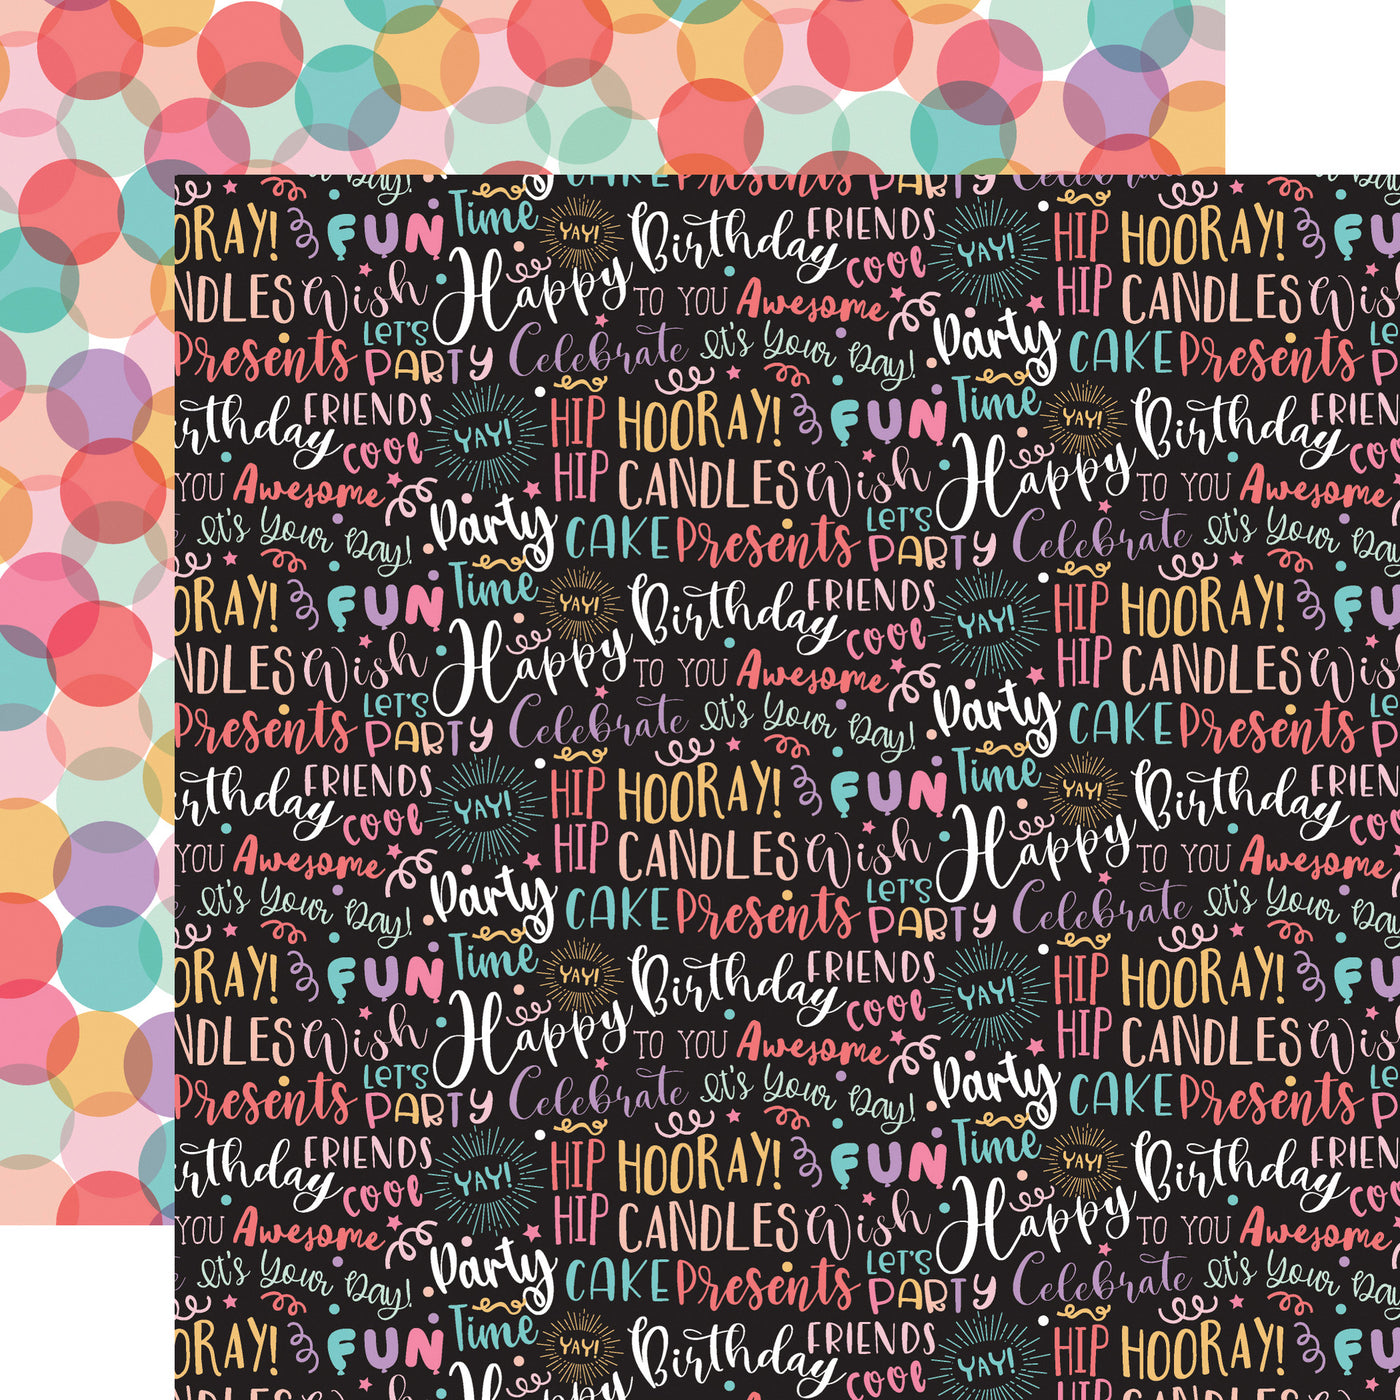 12x12 double-sided multi-colored patterned paper - (colorful pastel birthday phrases on a black background, pastel overlapping circles all over reverse) - from Echo Park Paper.